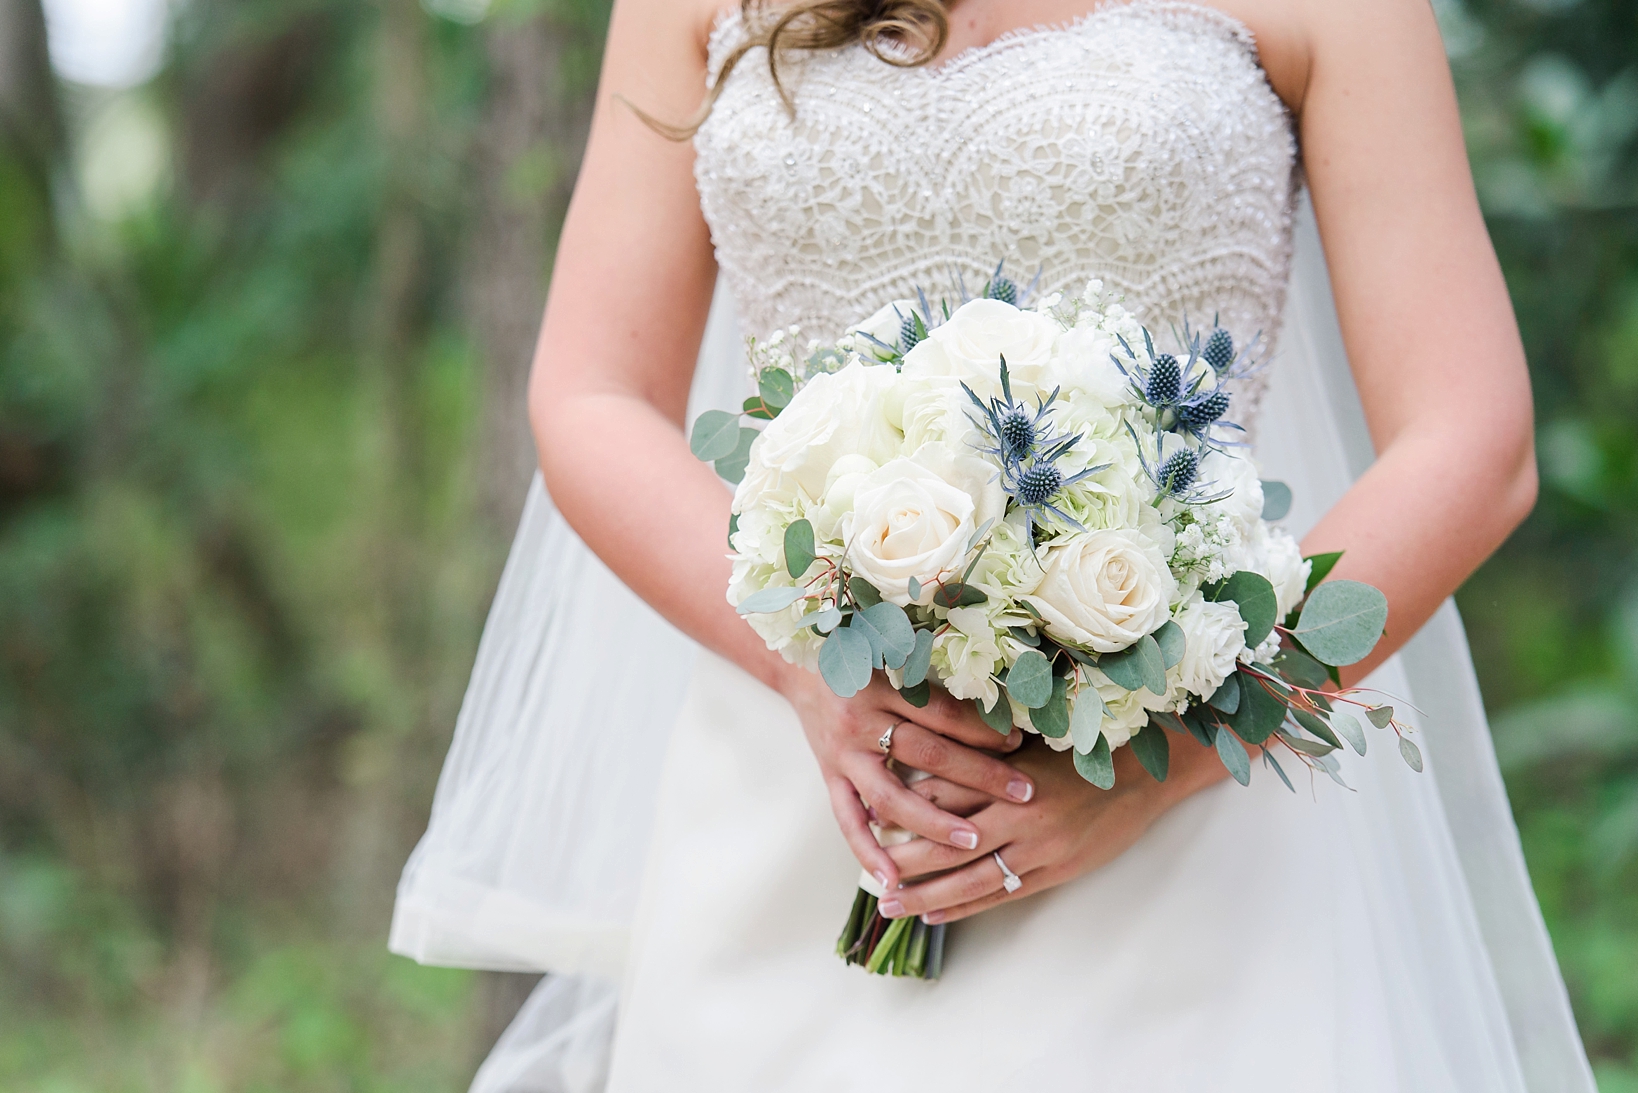 The bride's rose filled bouquet against her wedding dress by Sarah & Ben Photography